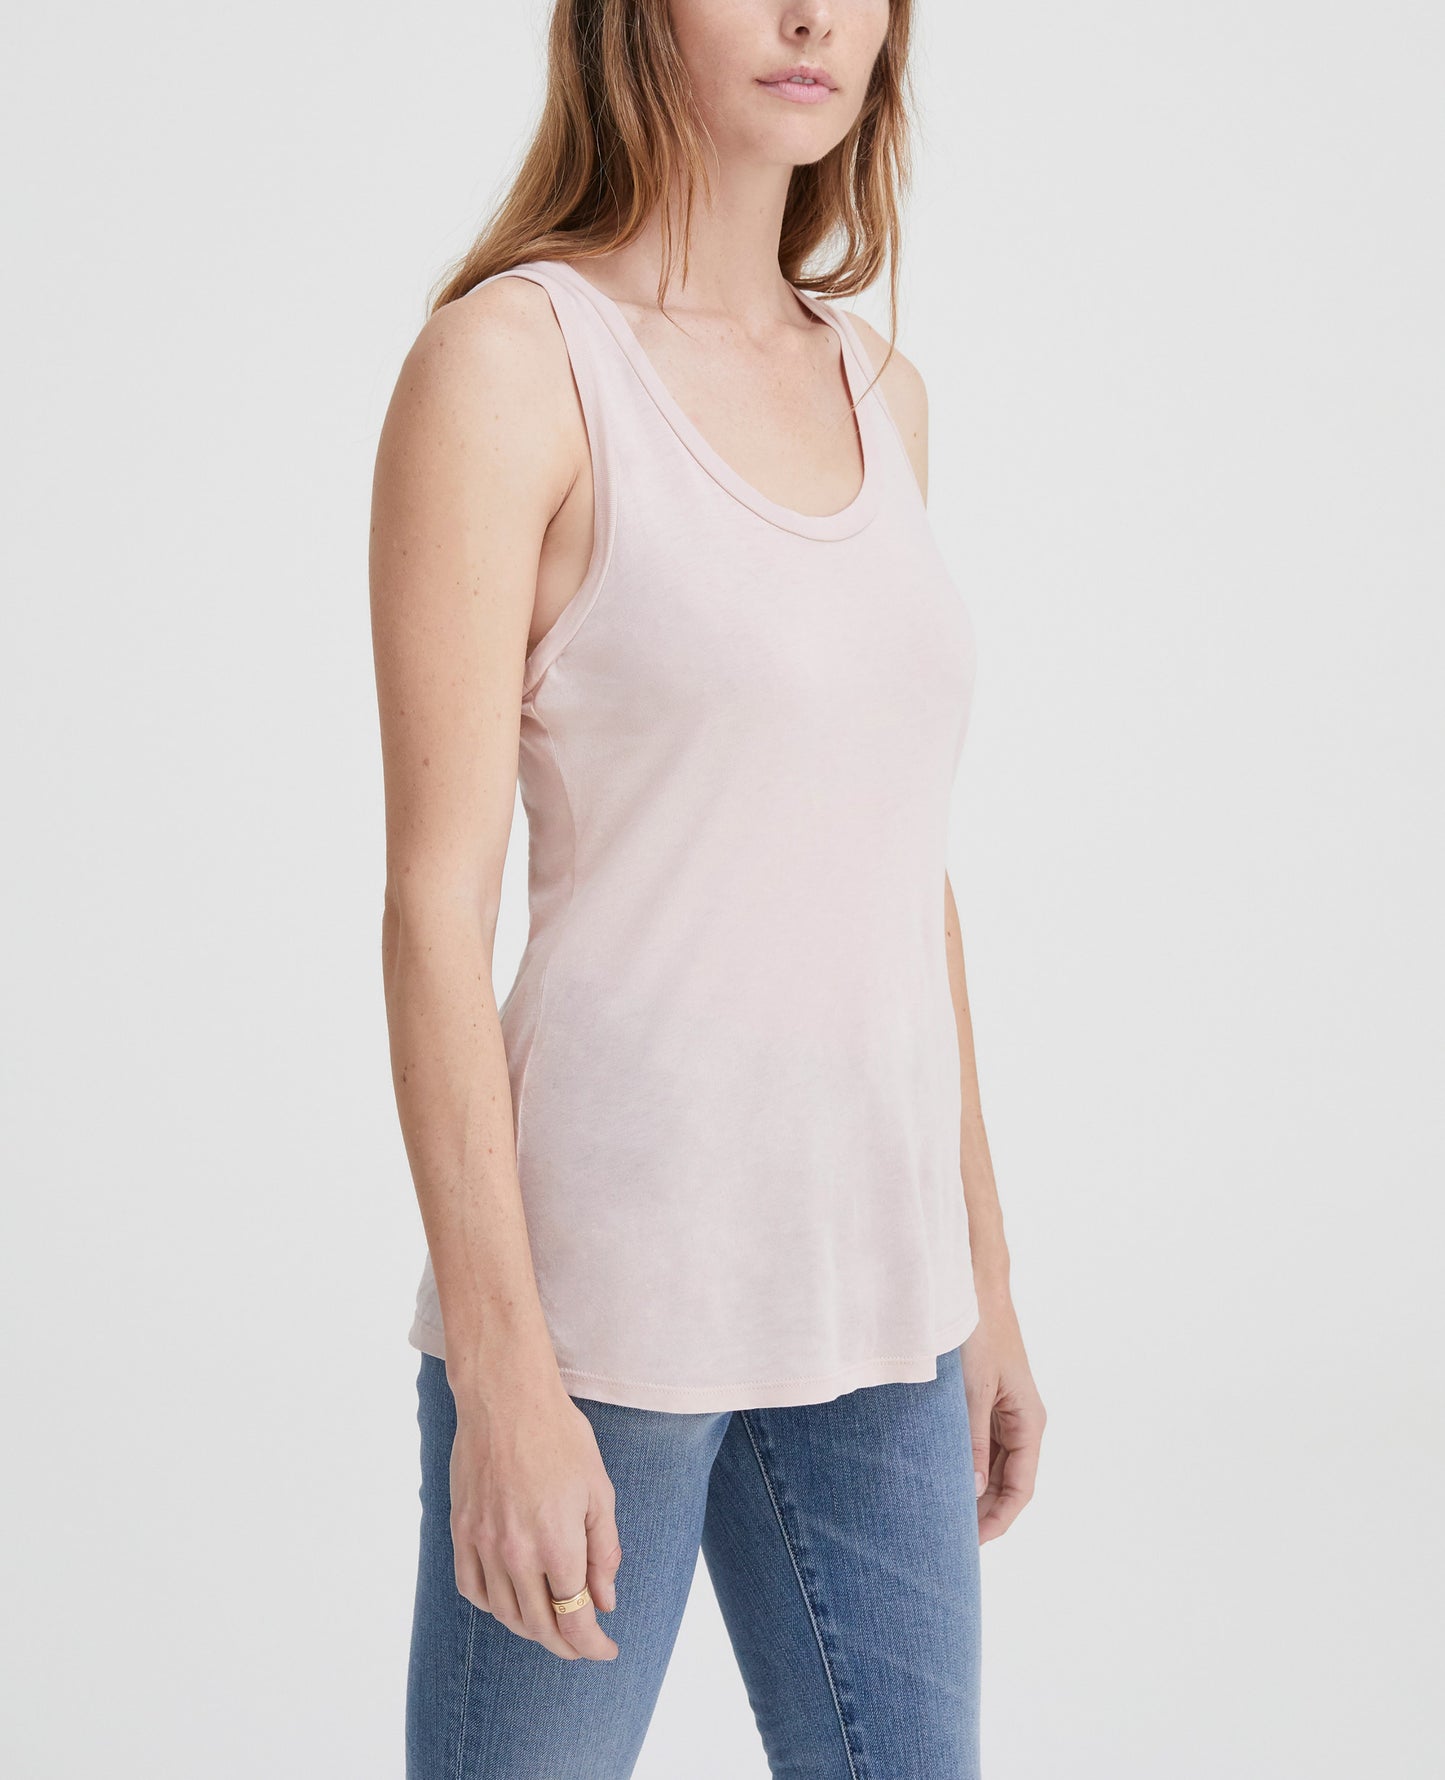 Cambria Tank Peaked Pink Classic Scoop Tank Women Tops Photo 1